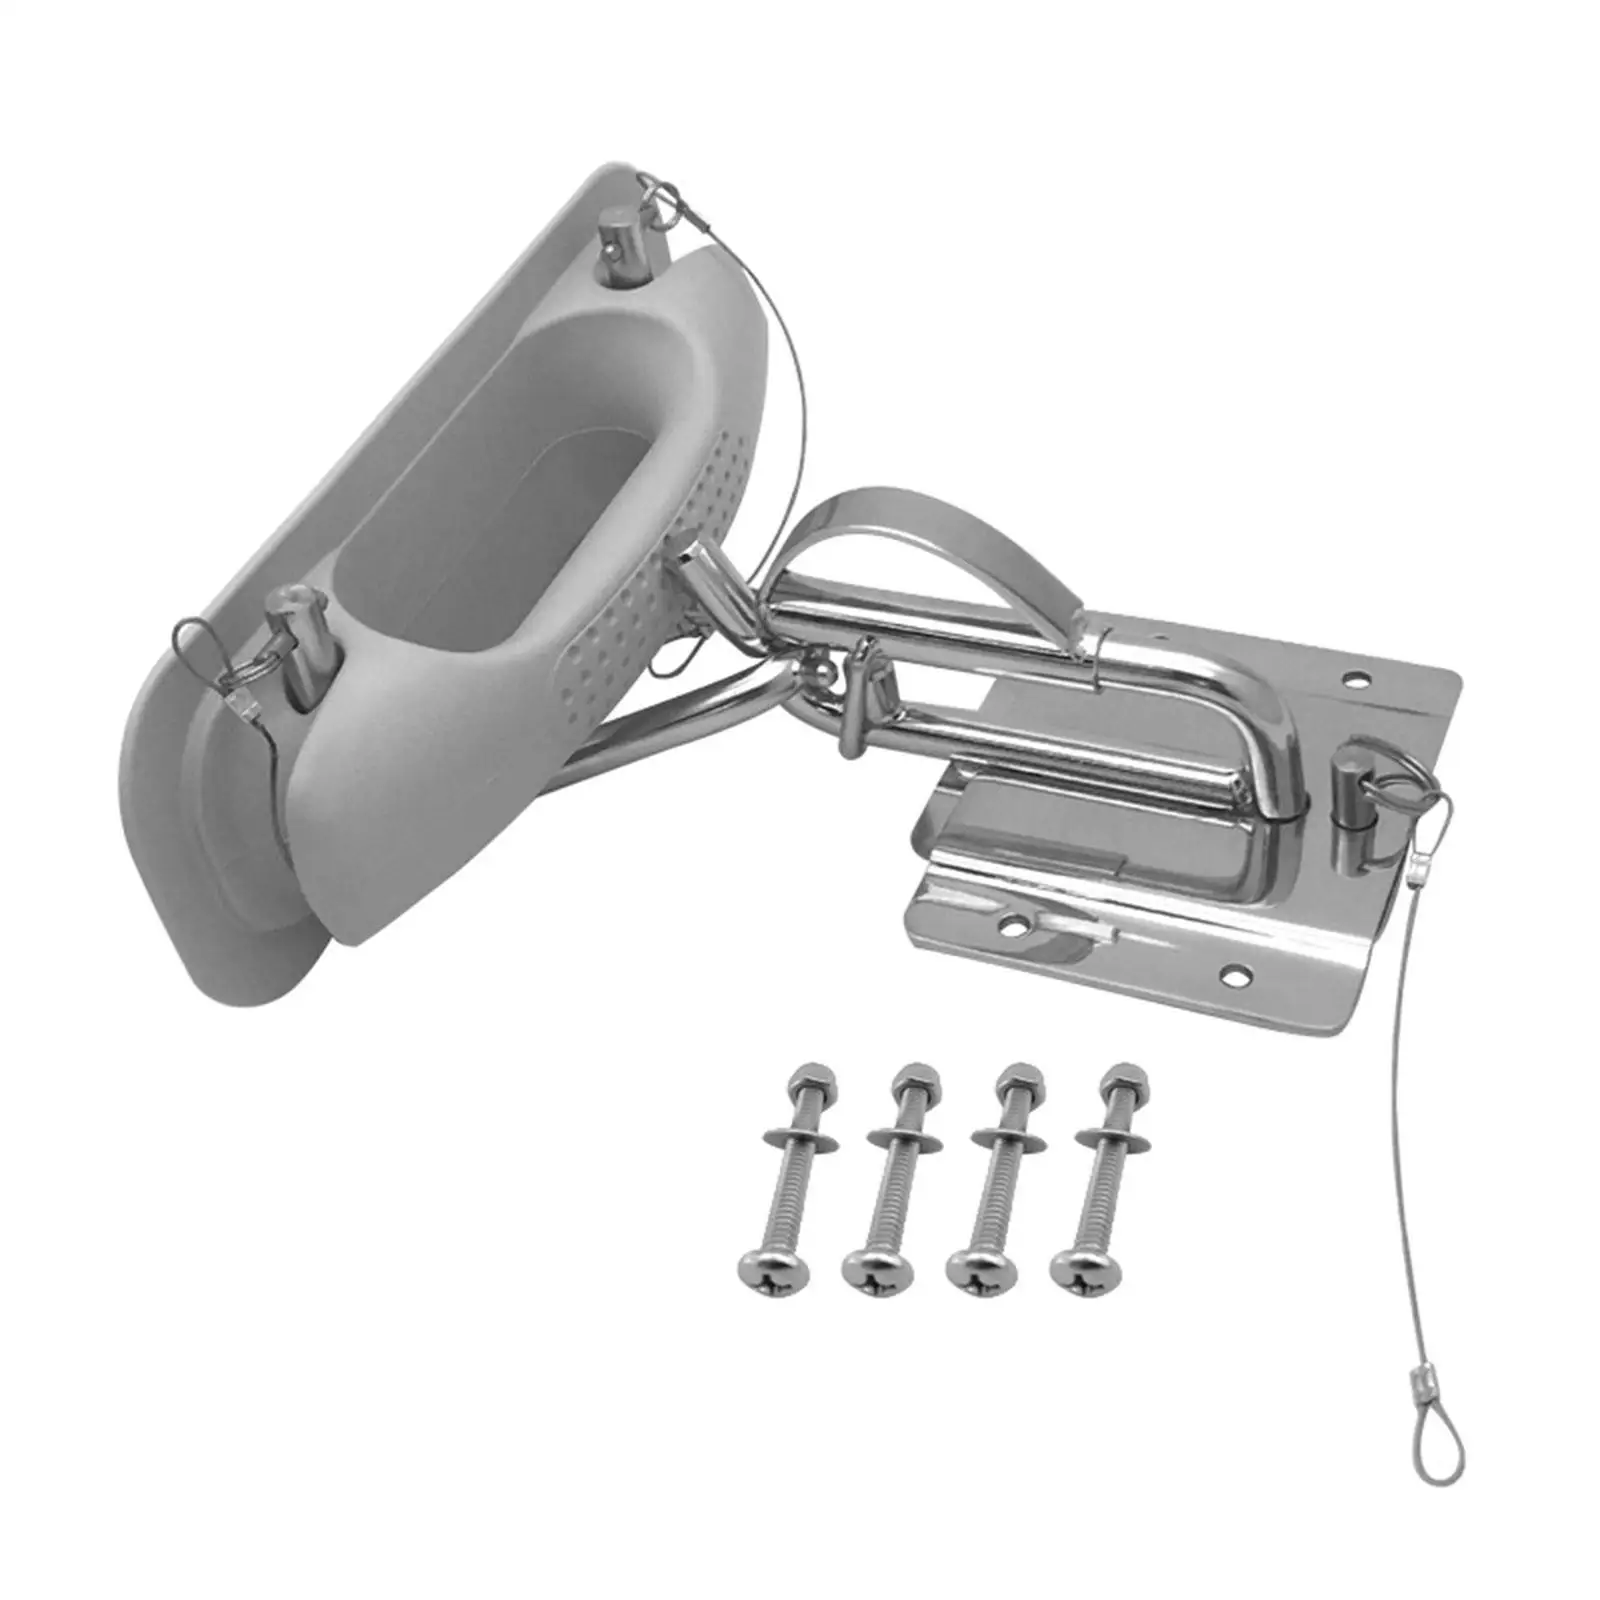 boat-snap-davits-set-durable-strong-handle-pad-quick-release-boat-grab-handle-stainless-steel-for-boat-marine-dinghy-yacht